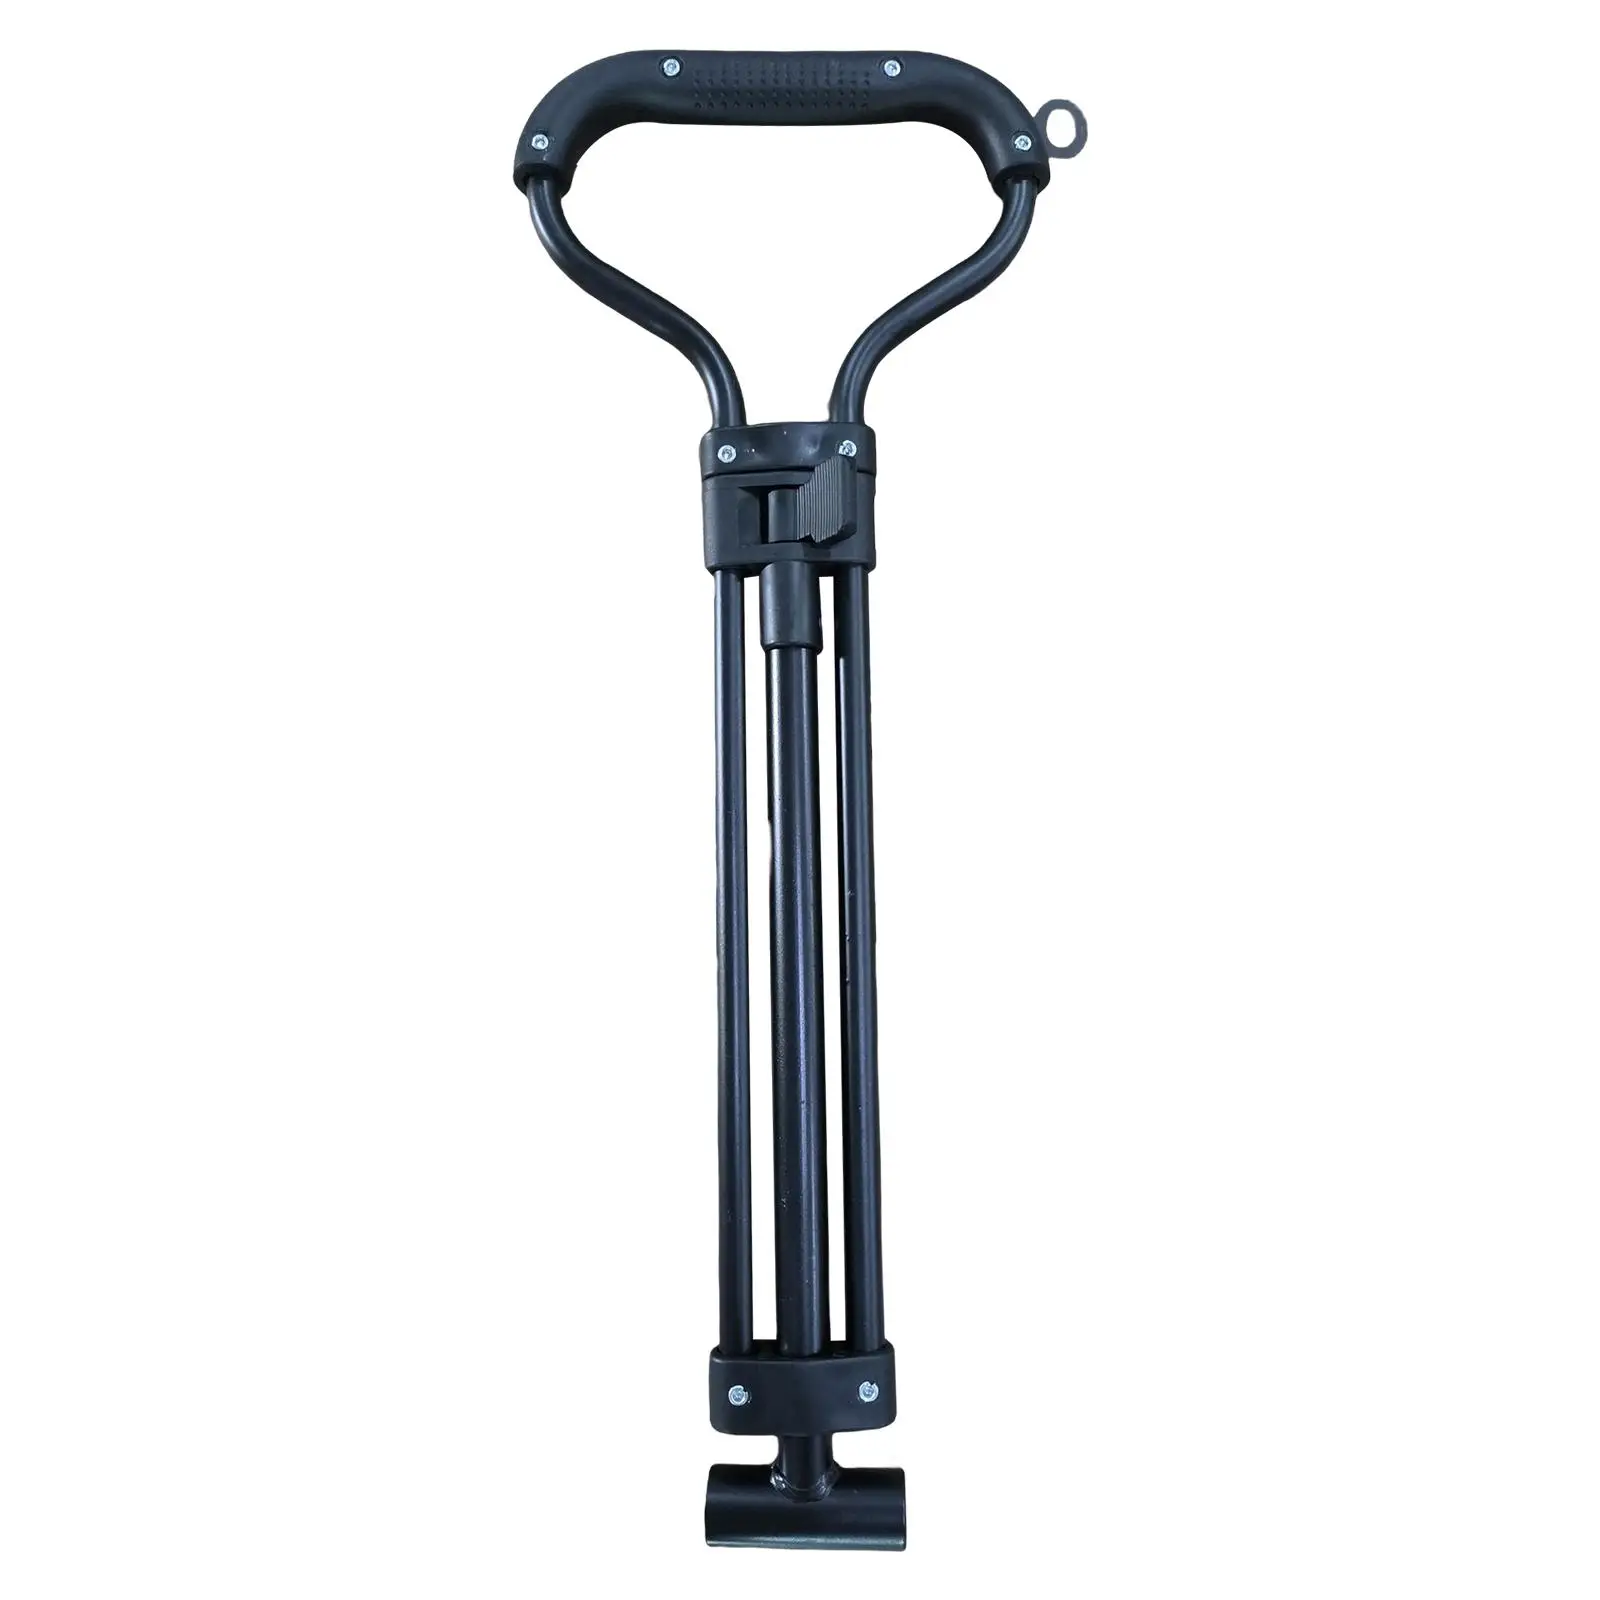 Pull Handle Accessories for Collapsible Picnic Camping Cart Black Garden